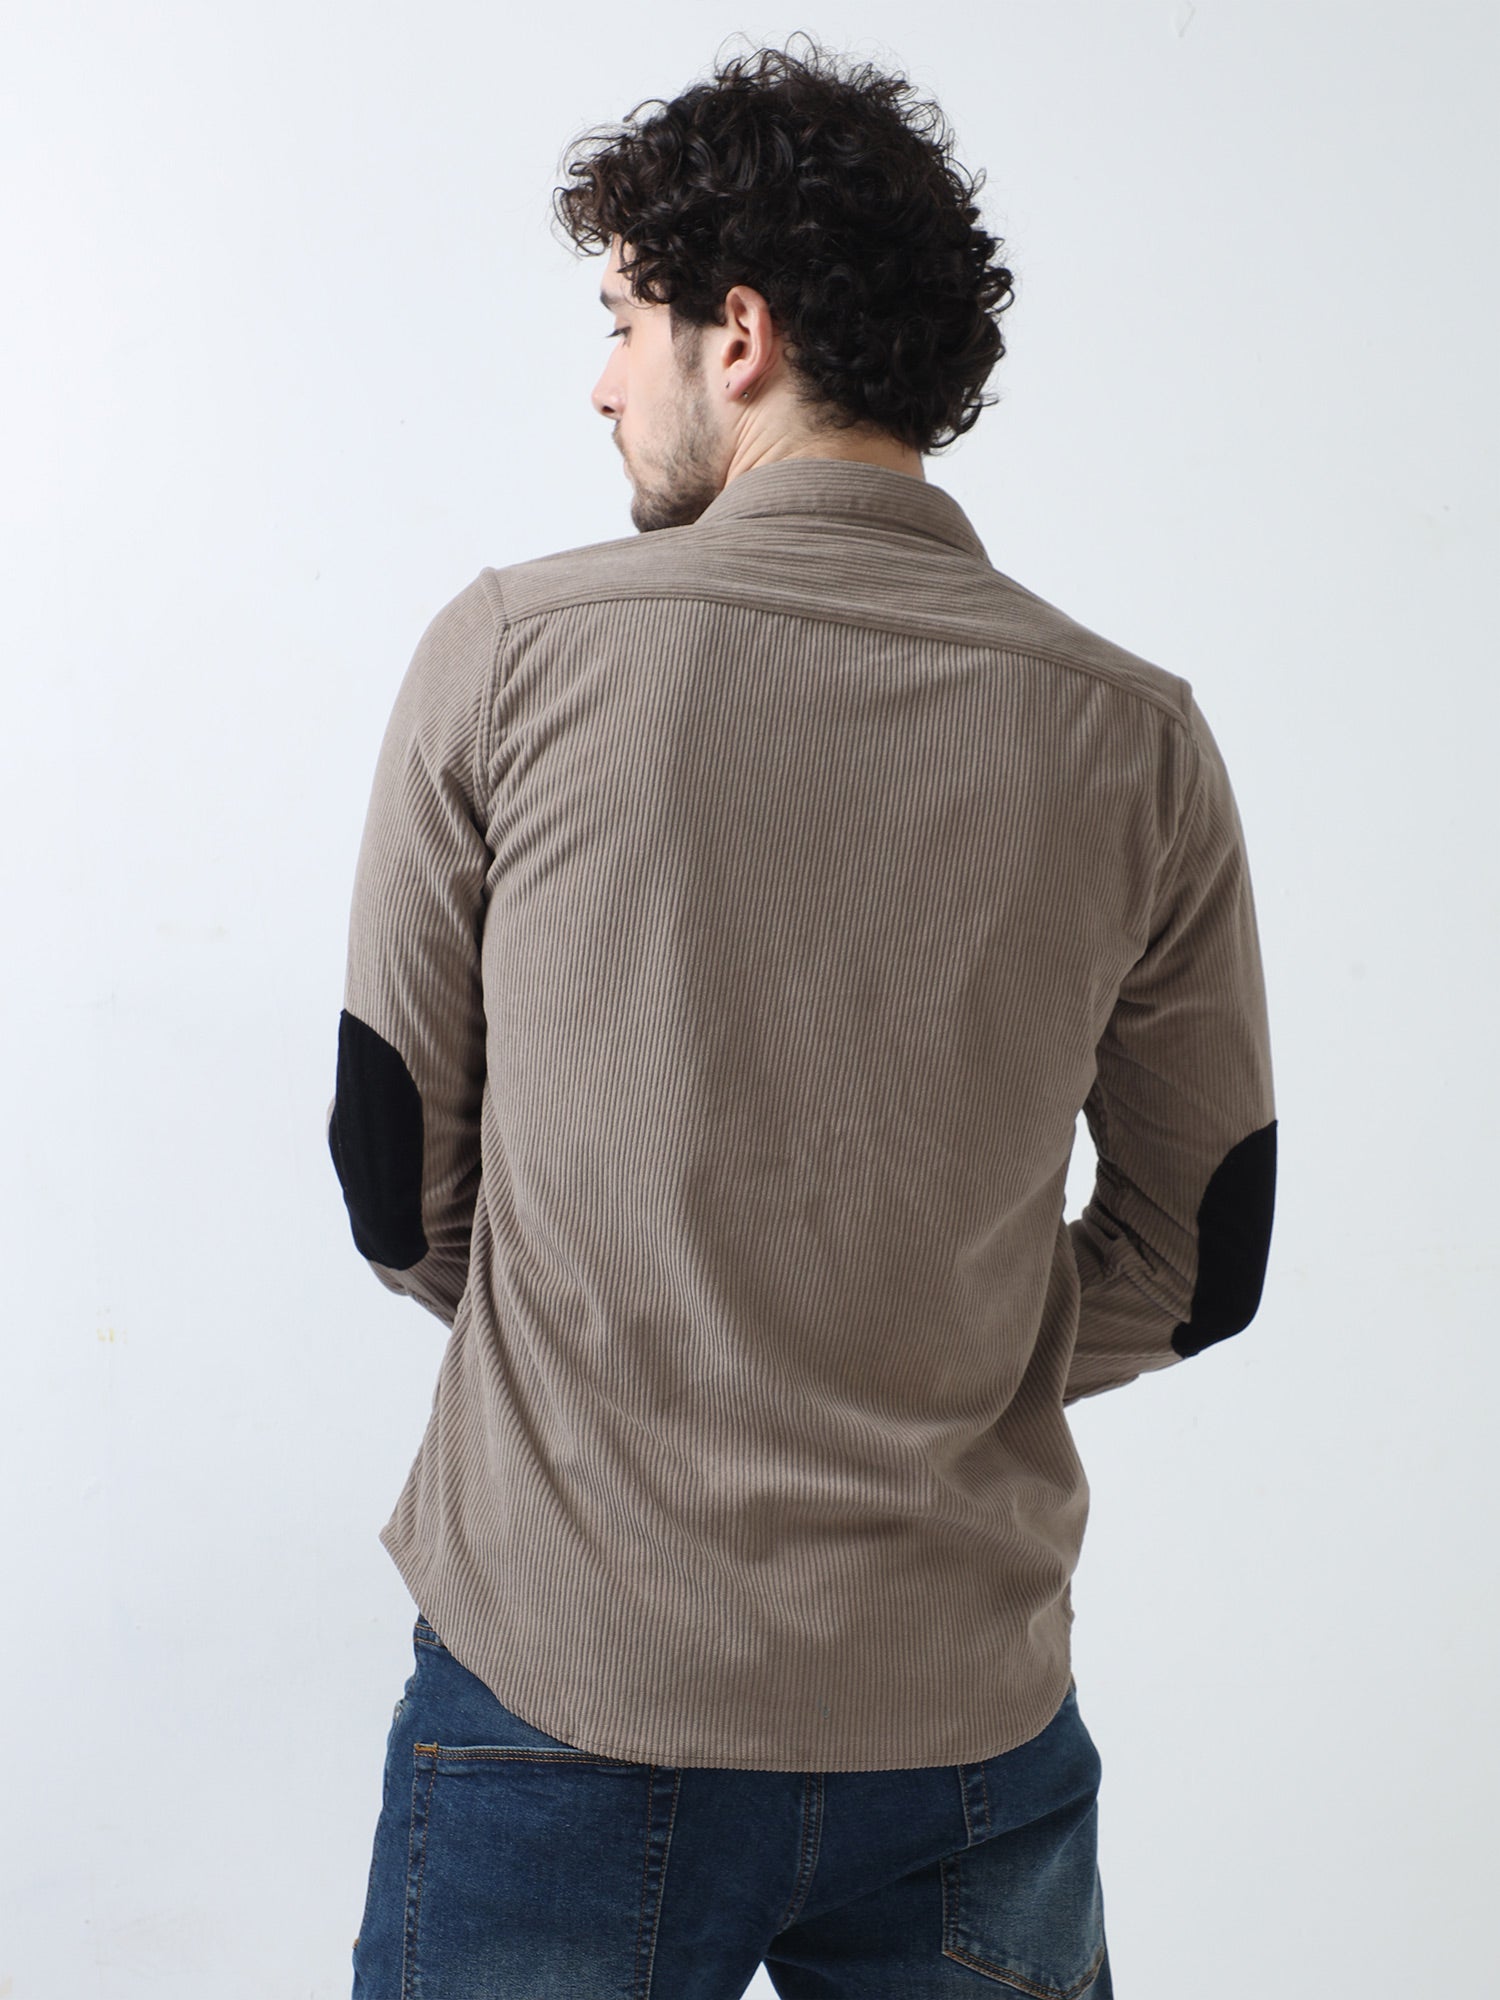 Tuscan Beige Corduroy Double Pocket Shirt with Elbow Patch